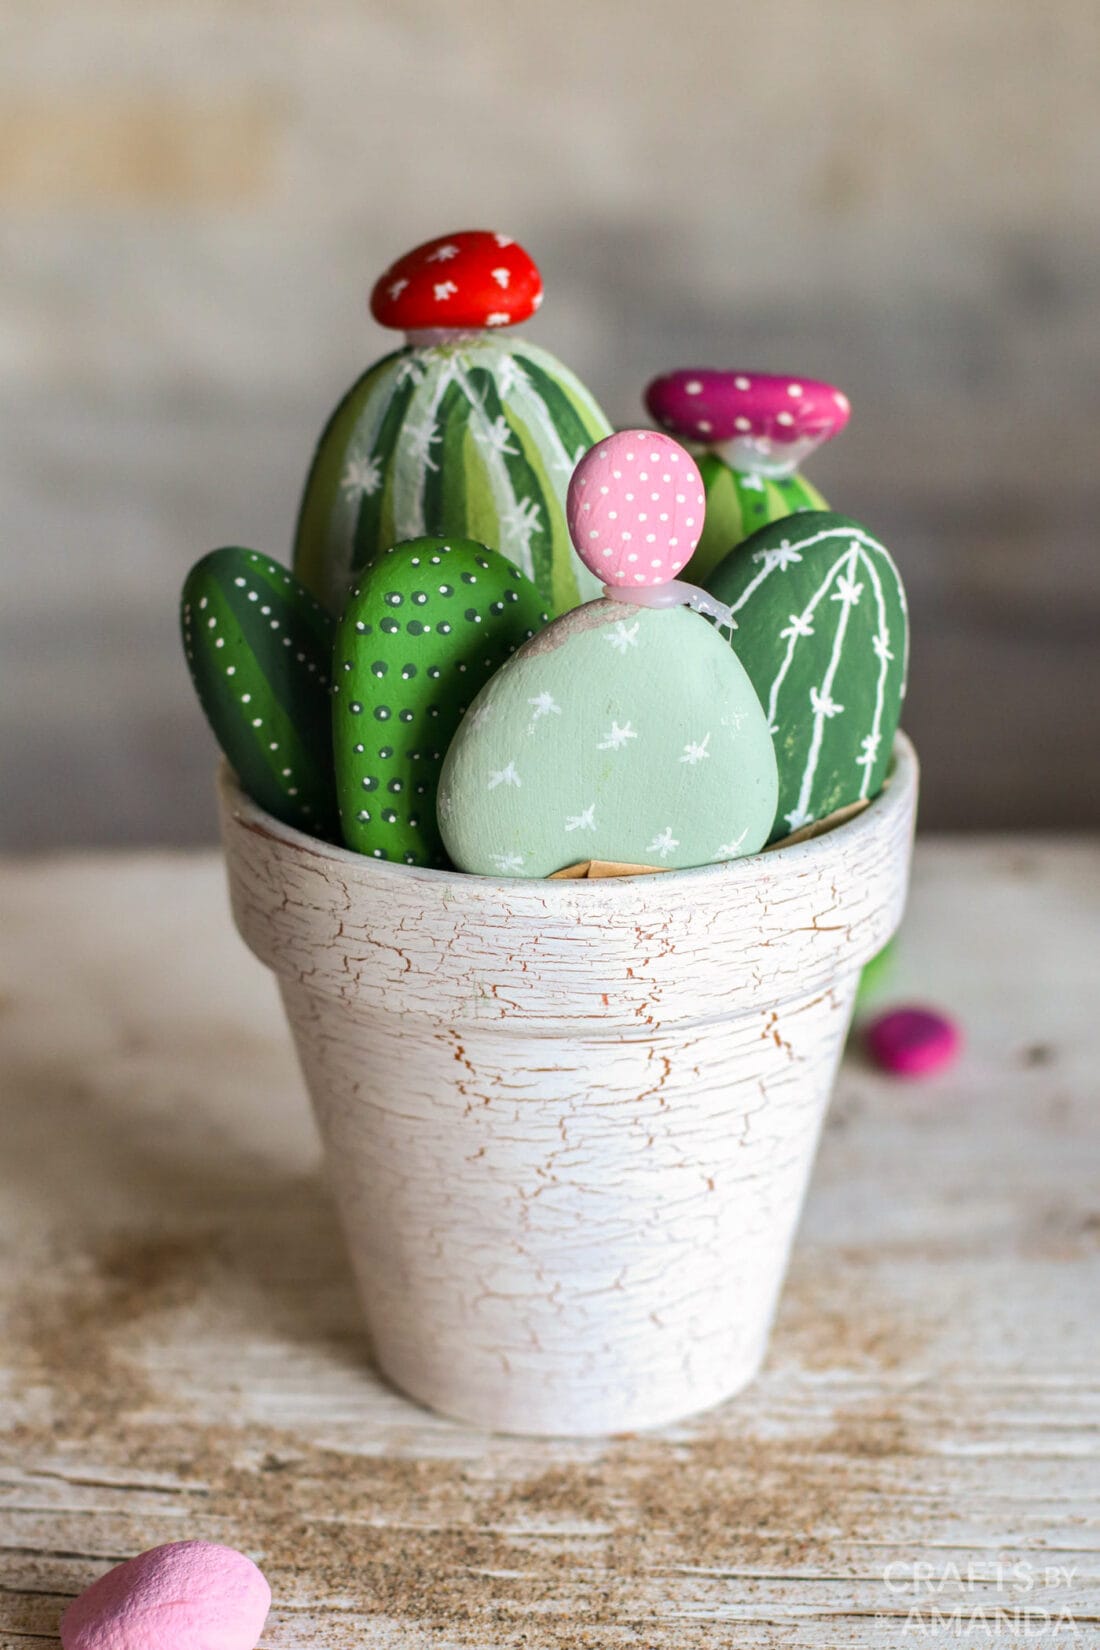 Clay pot filled with various rocks painted to look like cactuses